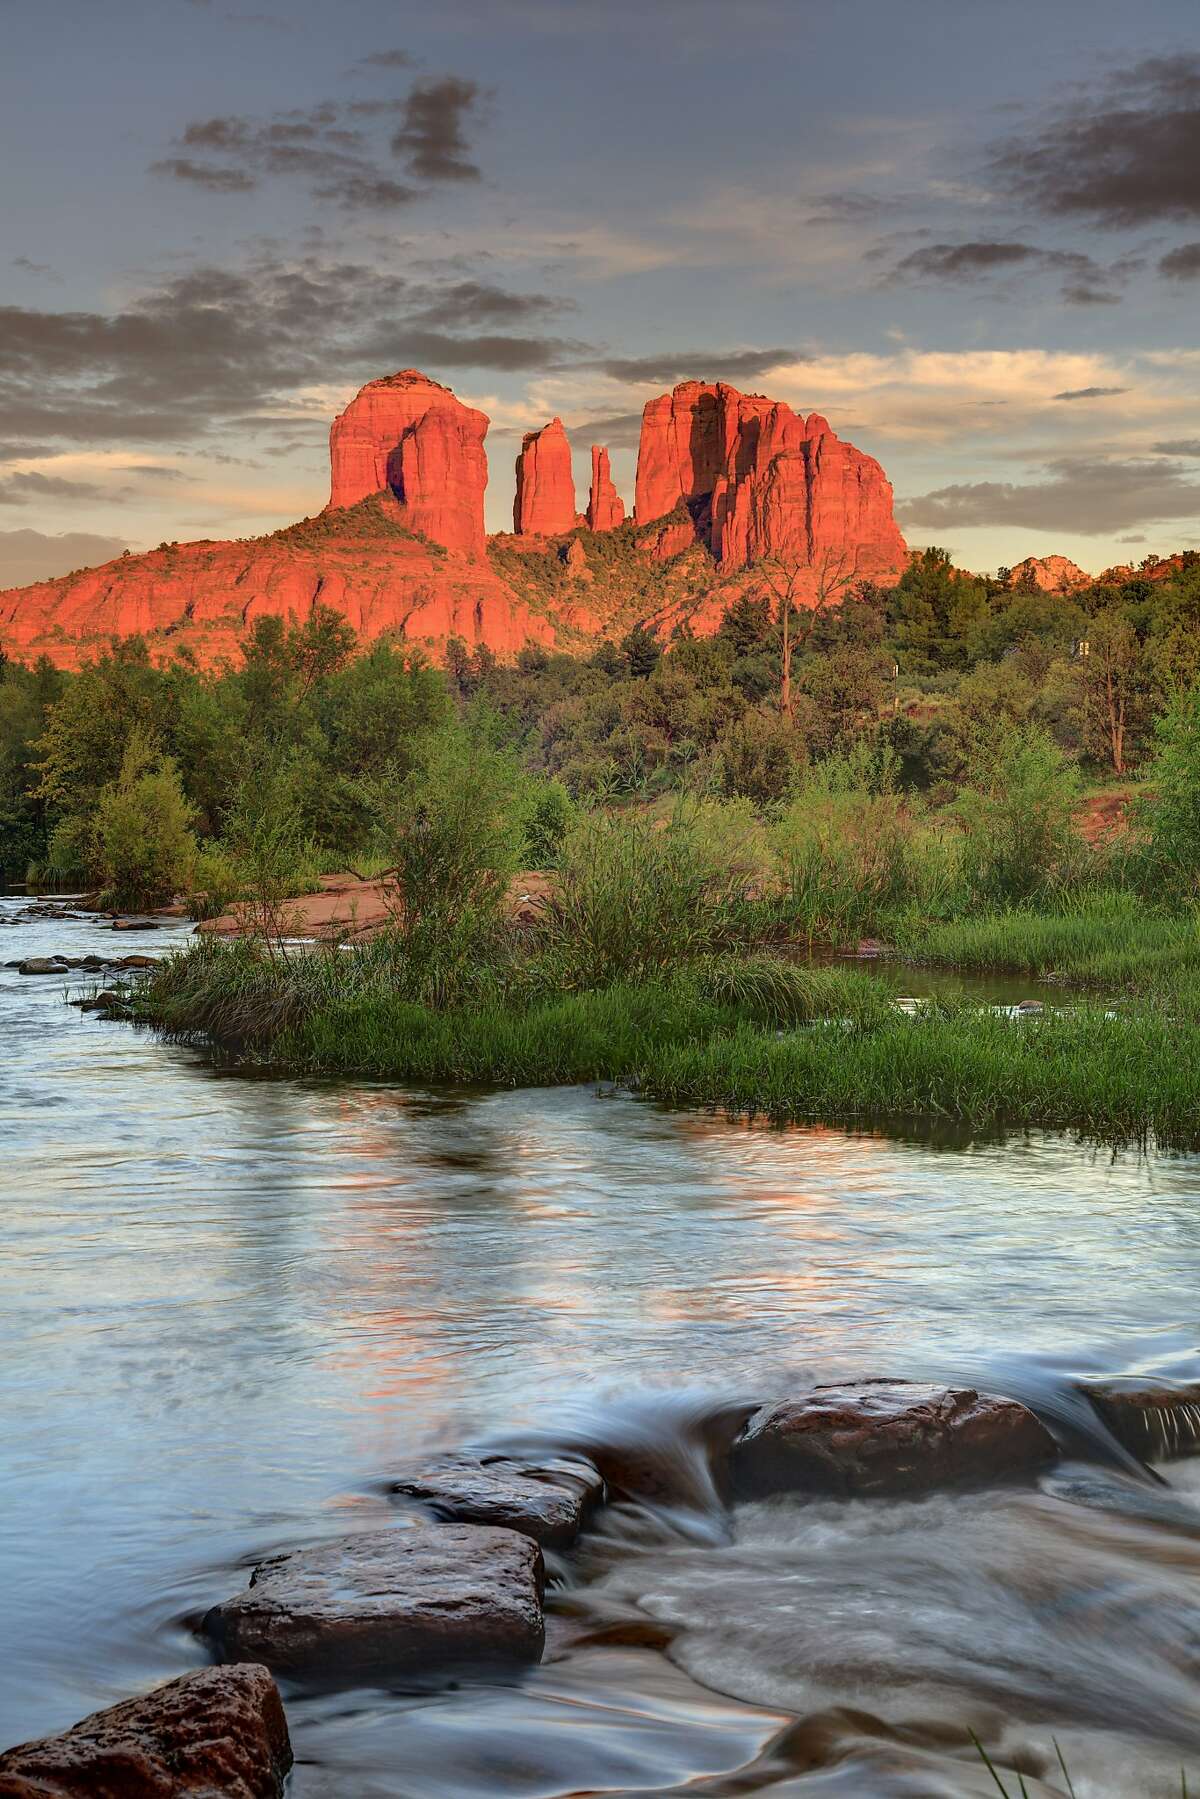 Cathedral Rock glowing at sunset in Sedona, Arizona. USA, Arizona, Sedona, Cathedral Rock glowing at sunset